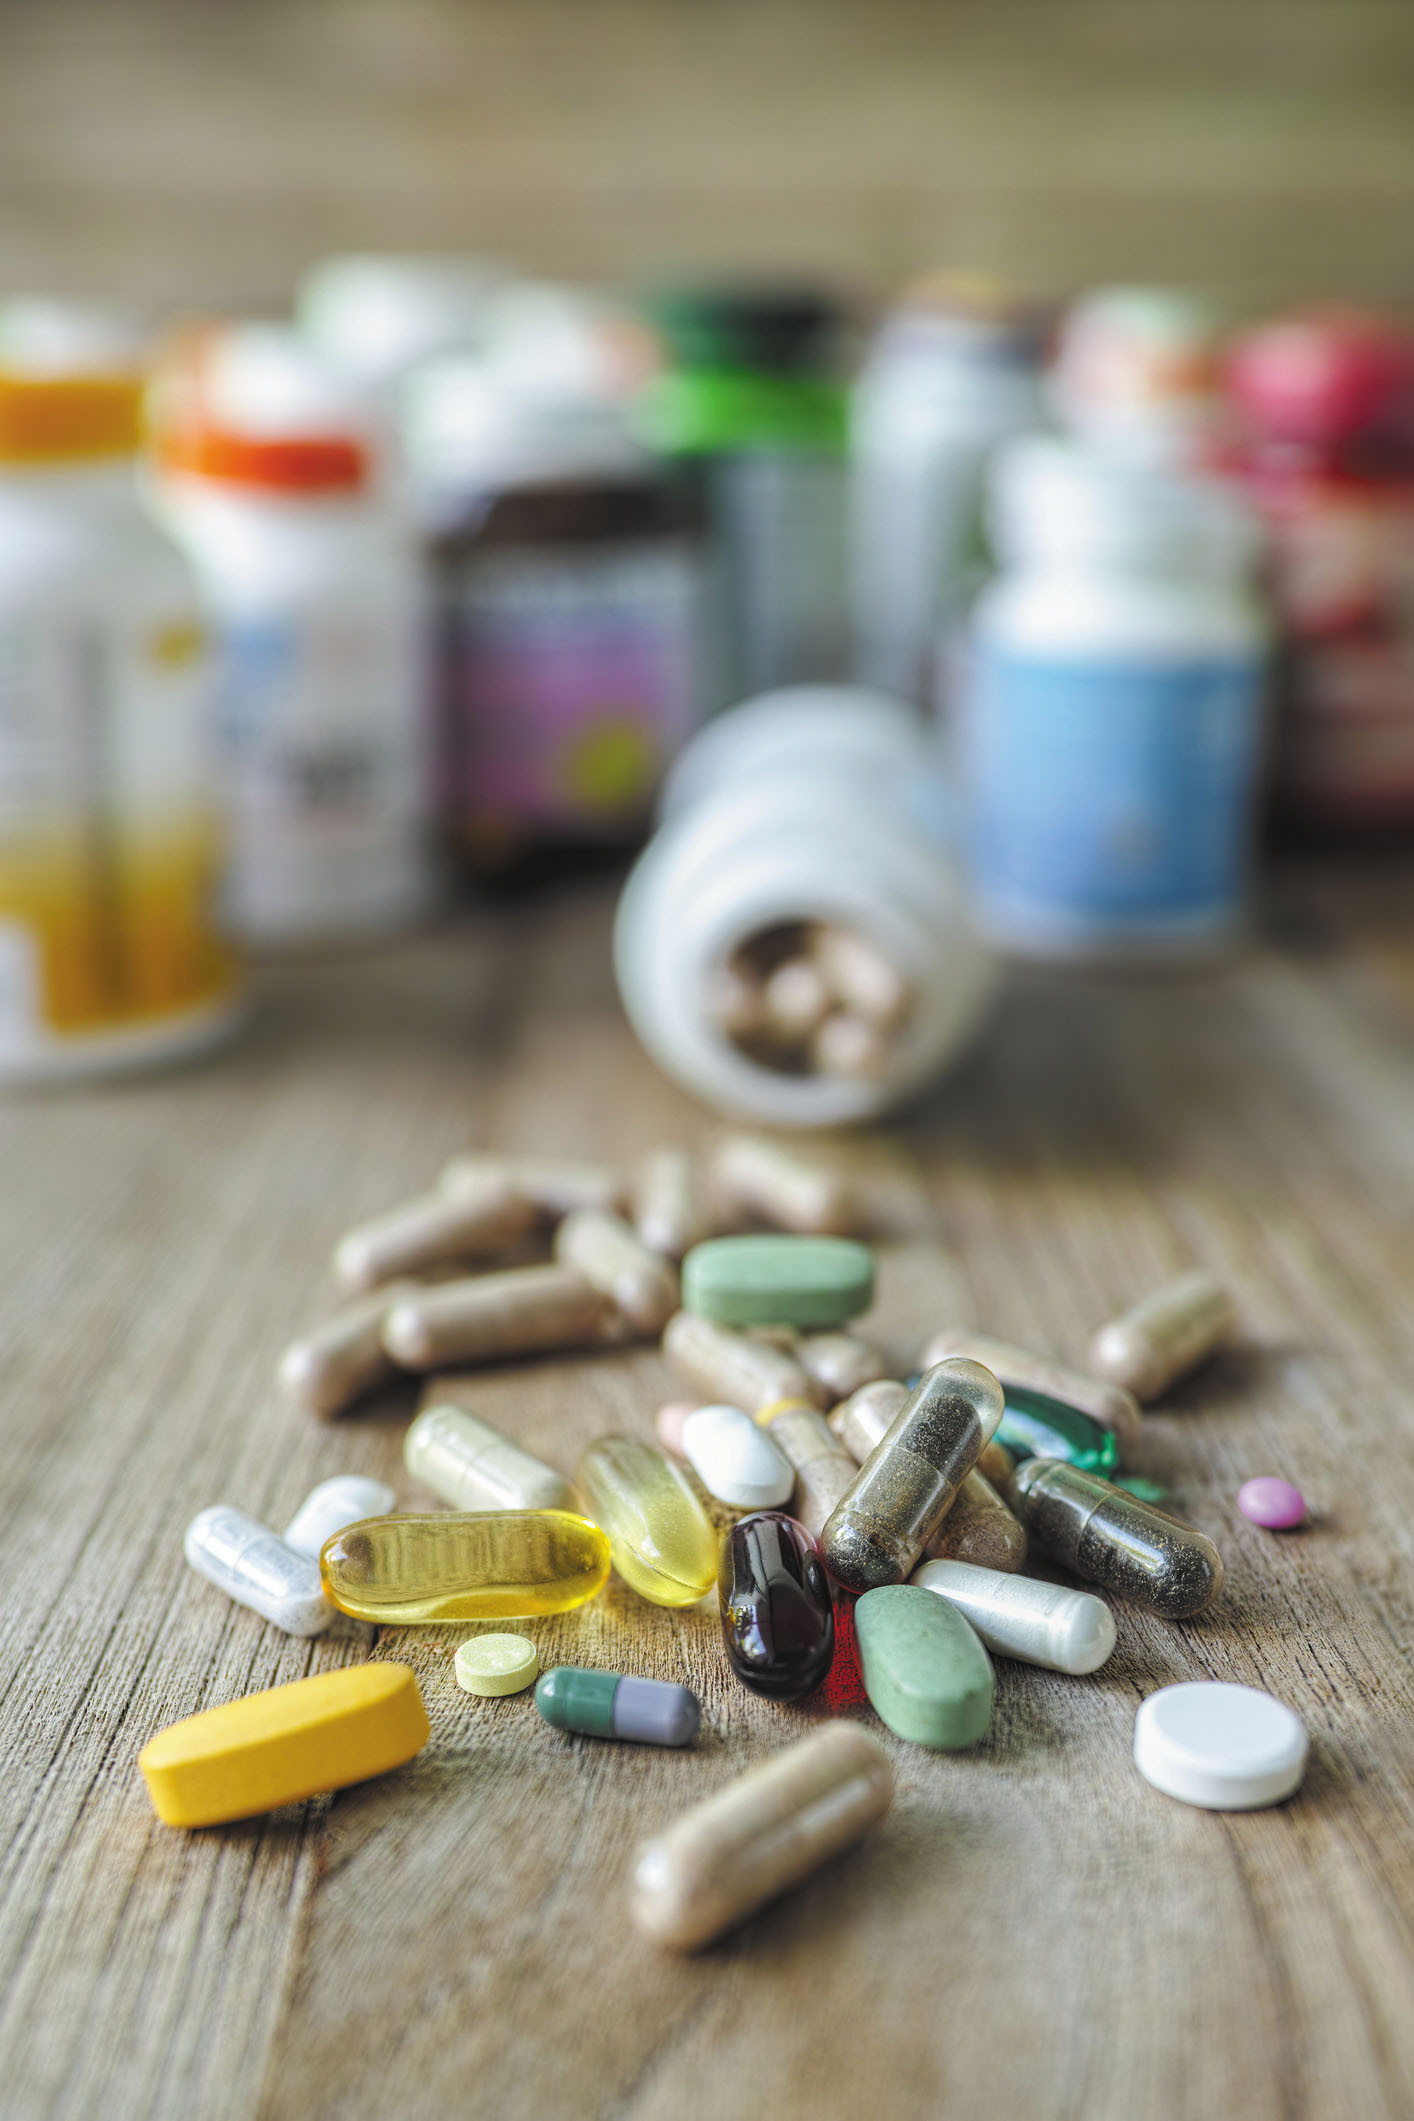 photo of an assortment of pills on a table with several bottles out of focus in the background, one lying on its side